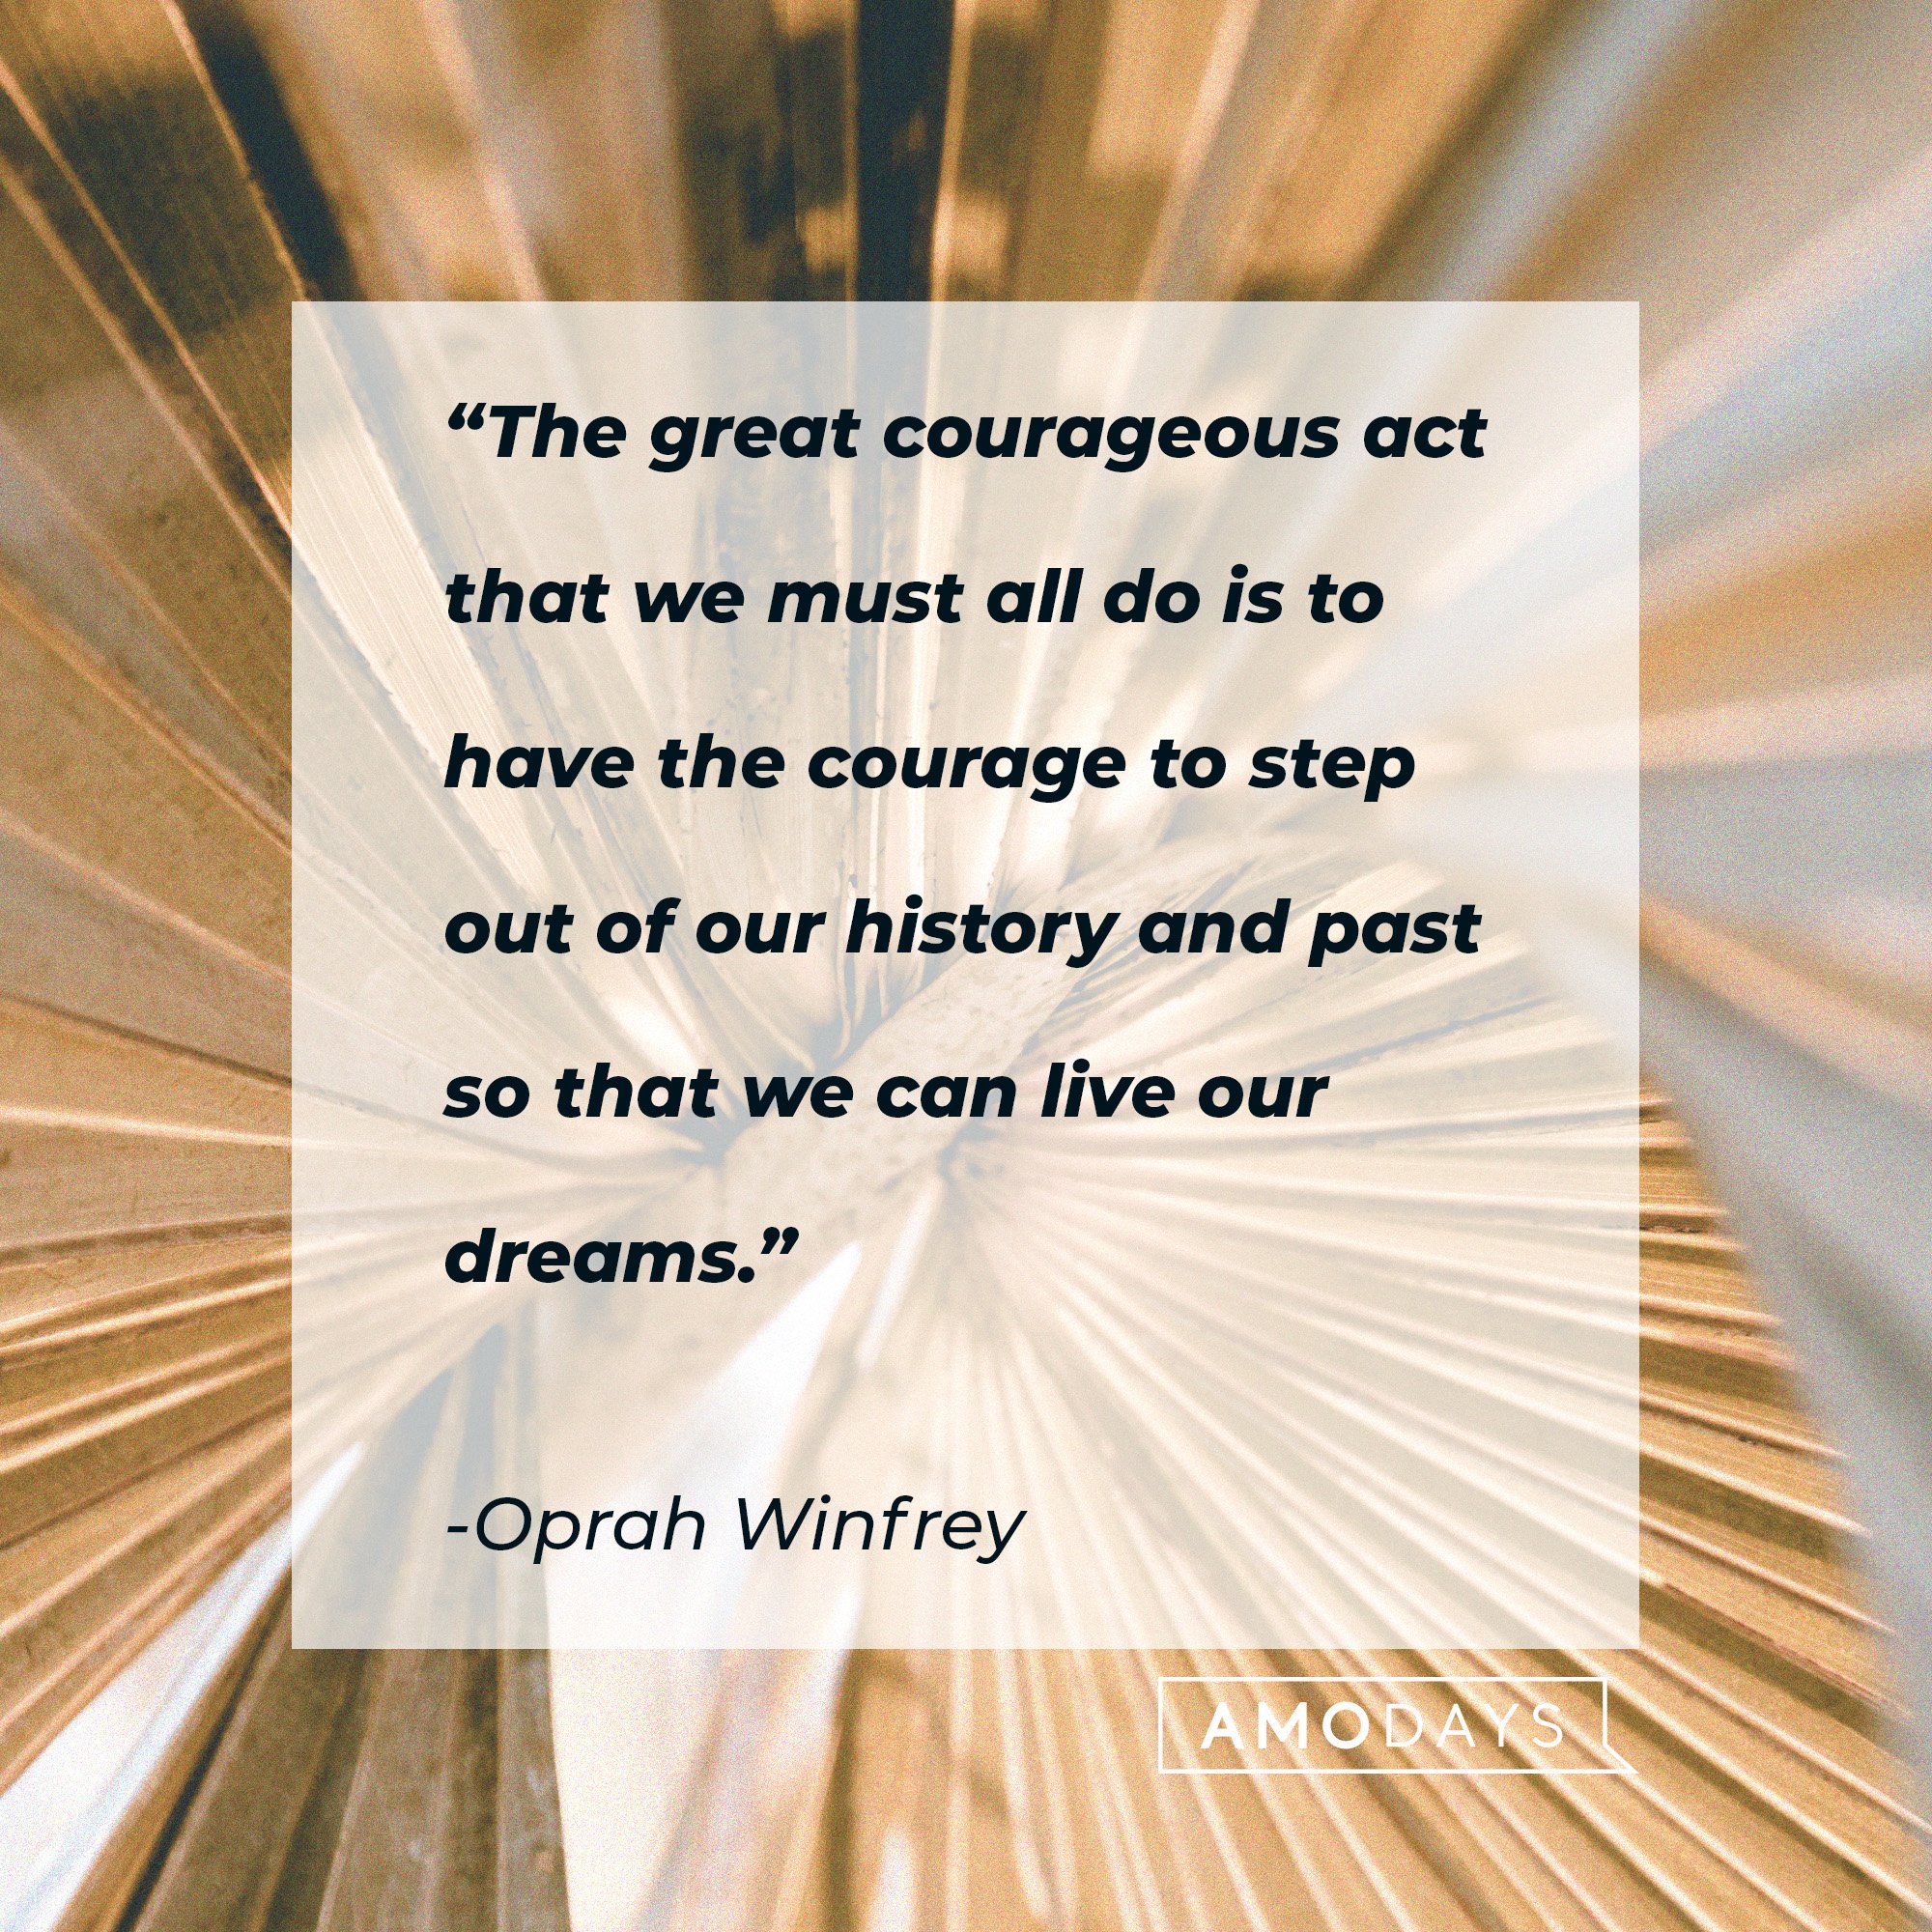  Oprah Winfrey's quote: “The great courageous act that we must all do is to have the courage to step out of our history and past so that we can live our dreams.” | Image: AmoDays